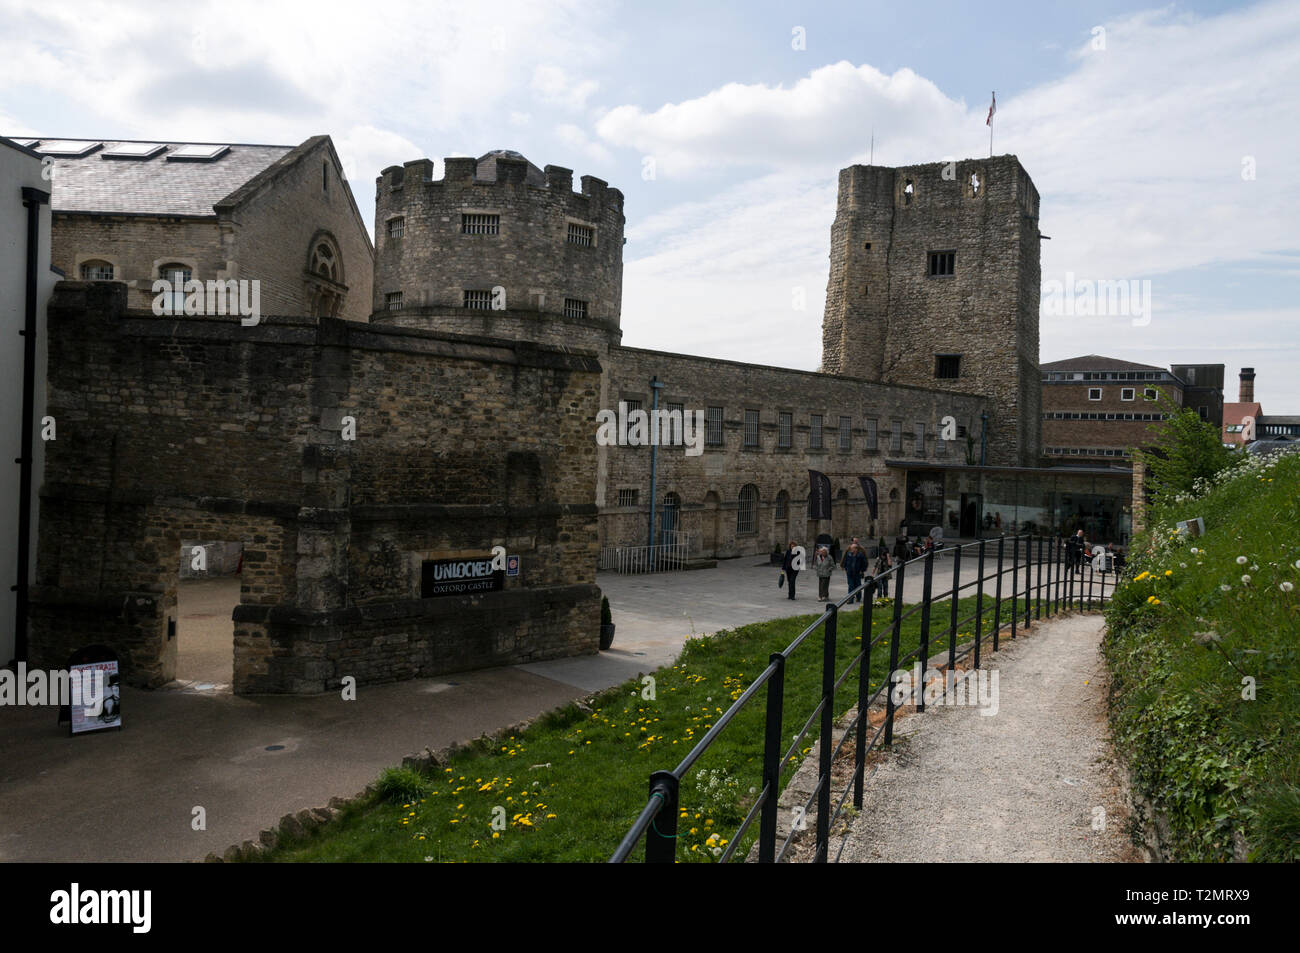 The Oxford Castle-unlocked and probably Oxford's oldest Saxon tower, St. George’s tower and goal in Oxford, Britain.  The 12th or early 13th century m Stock Photo